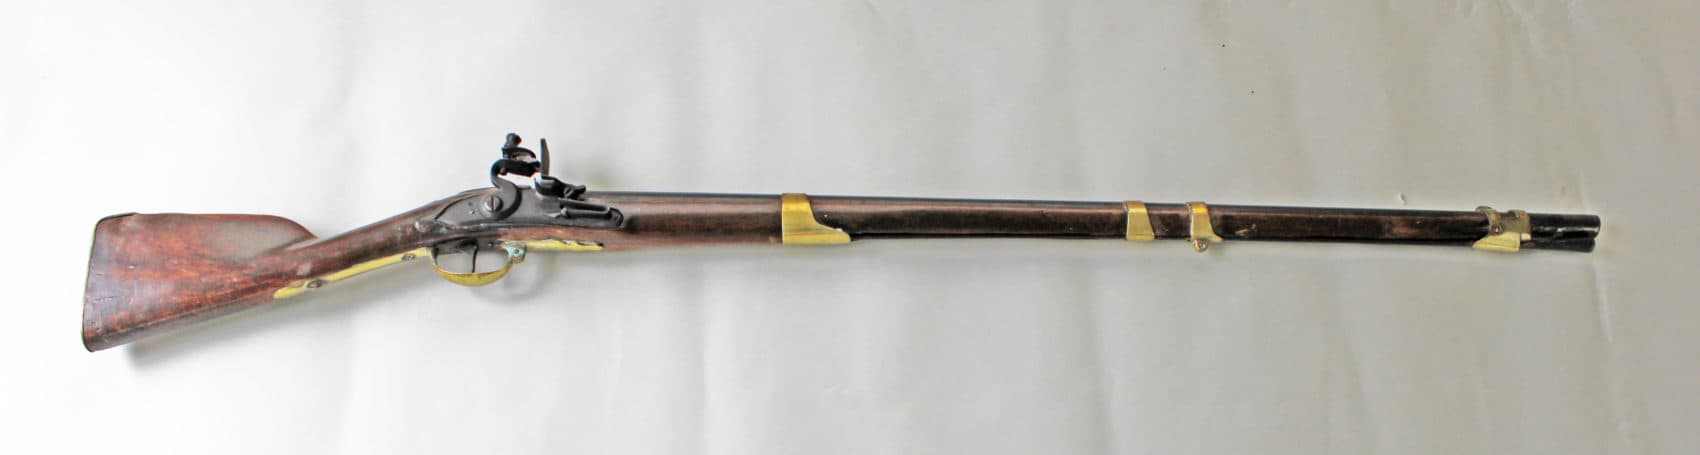 Musket That Fired 1st Shot In Battle Of Bunker Hill Up For Auction Wbur News - bunker hill roblox wiki